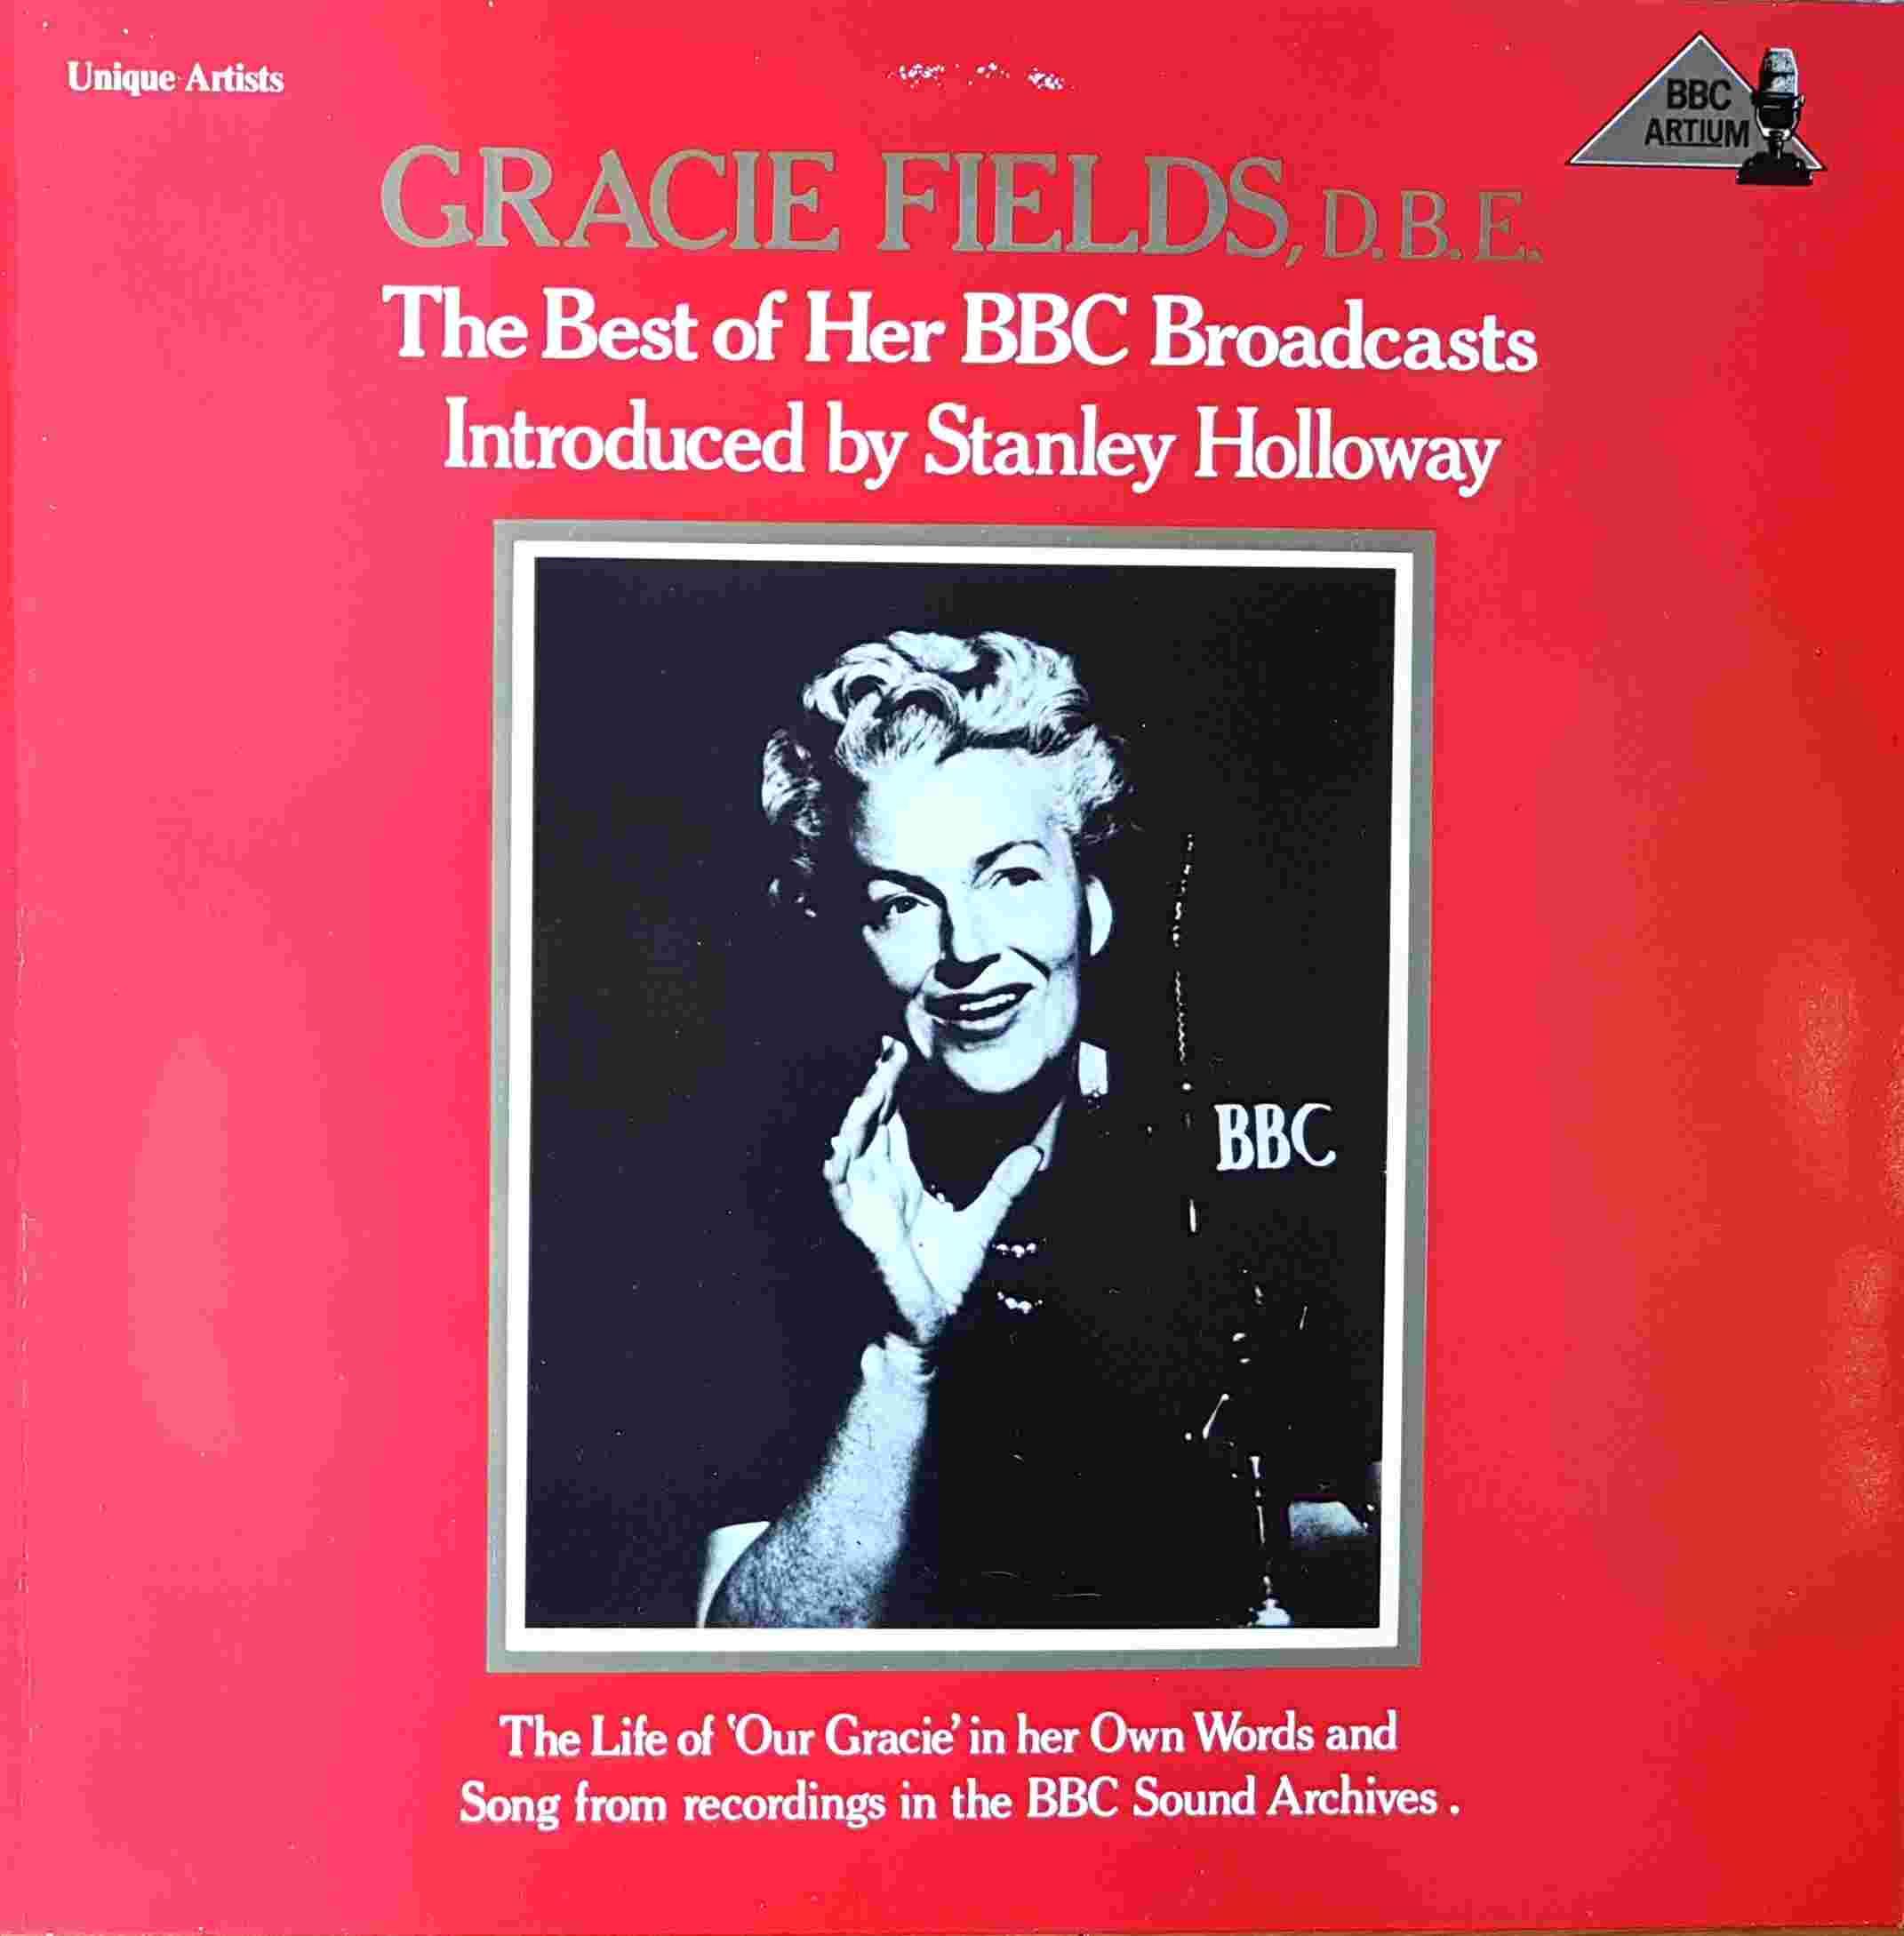 Picture of REGL 380 Gracie Fields, O. B. E. by artist Gracie Fields, O. B. E. from the BBC albums - Records and Tapes library